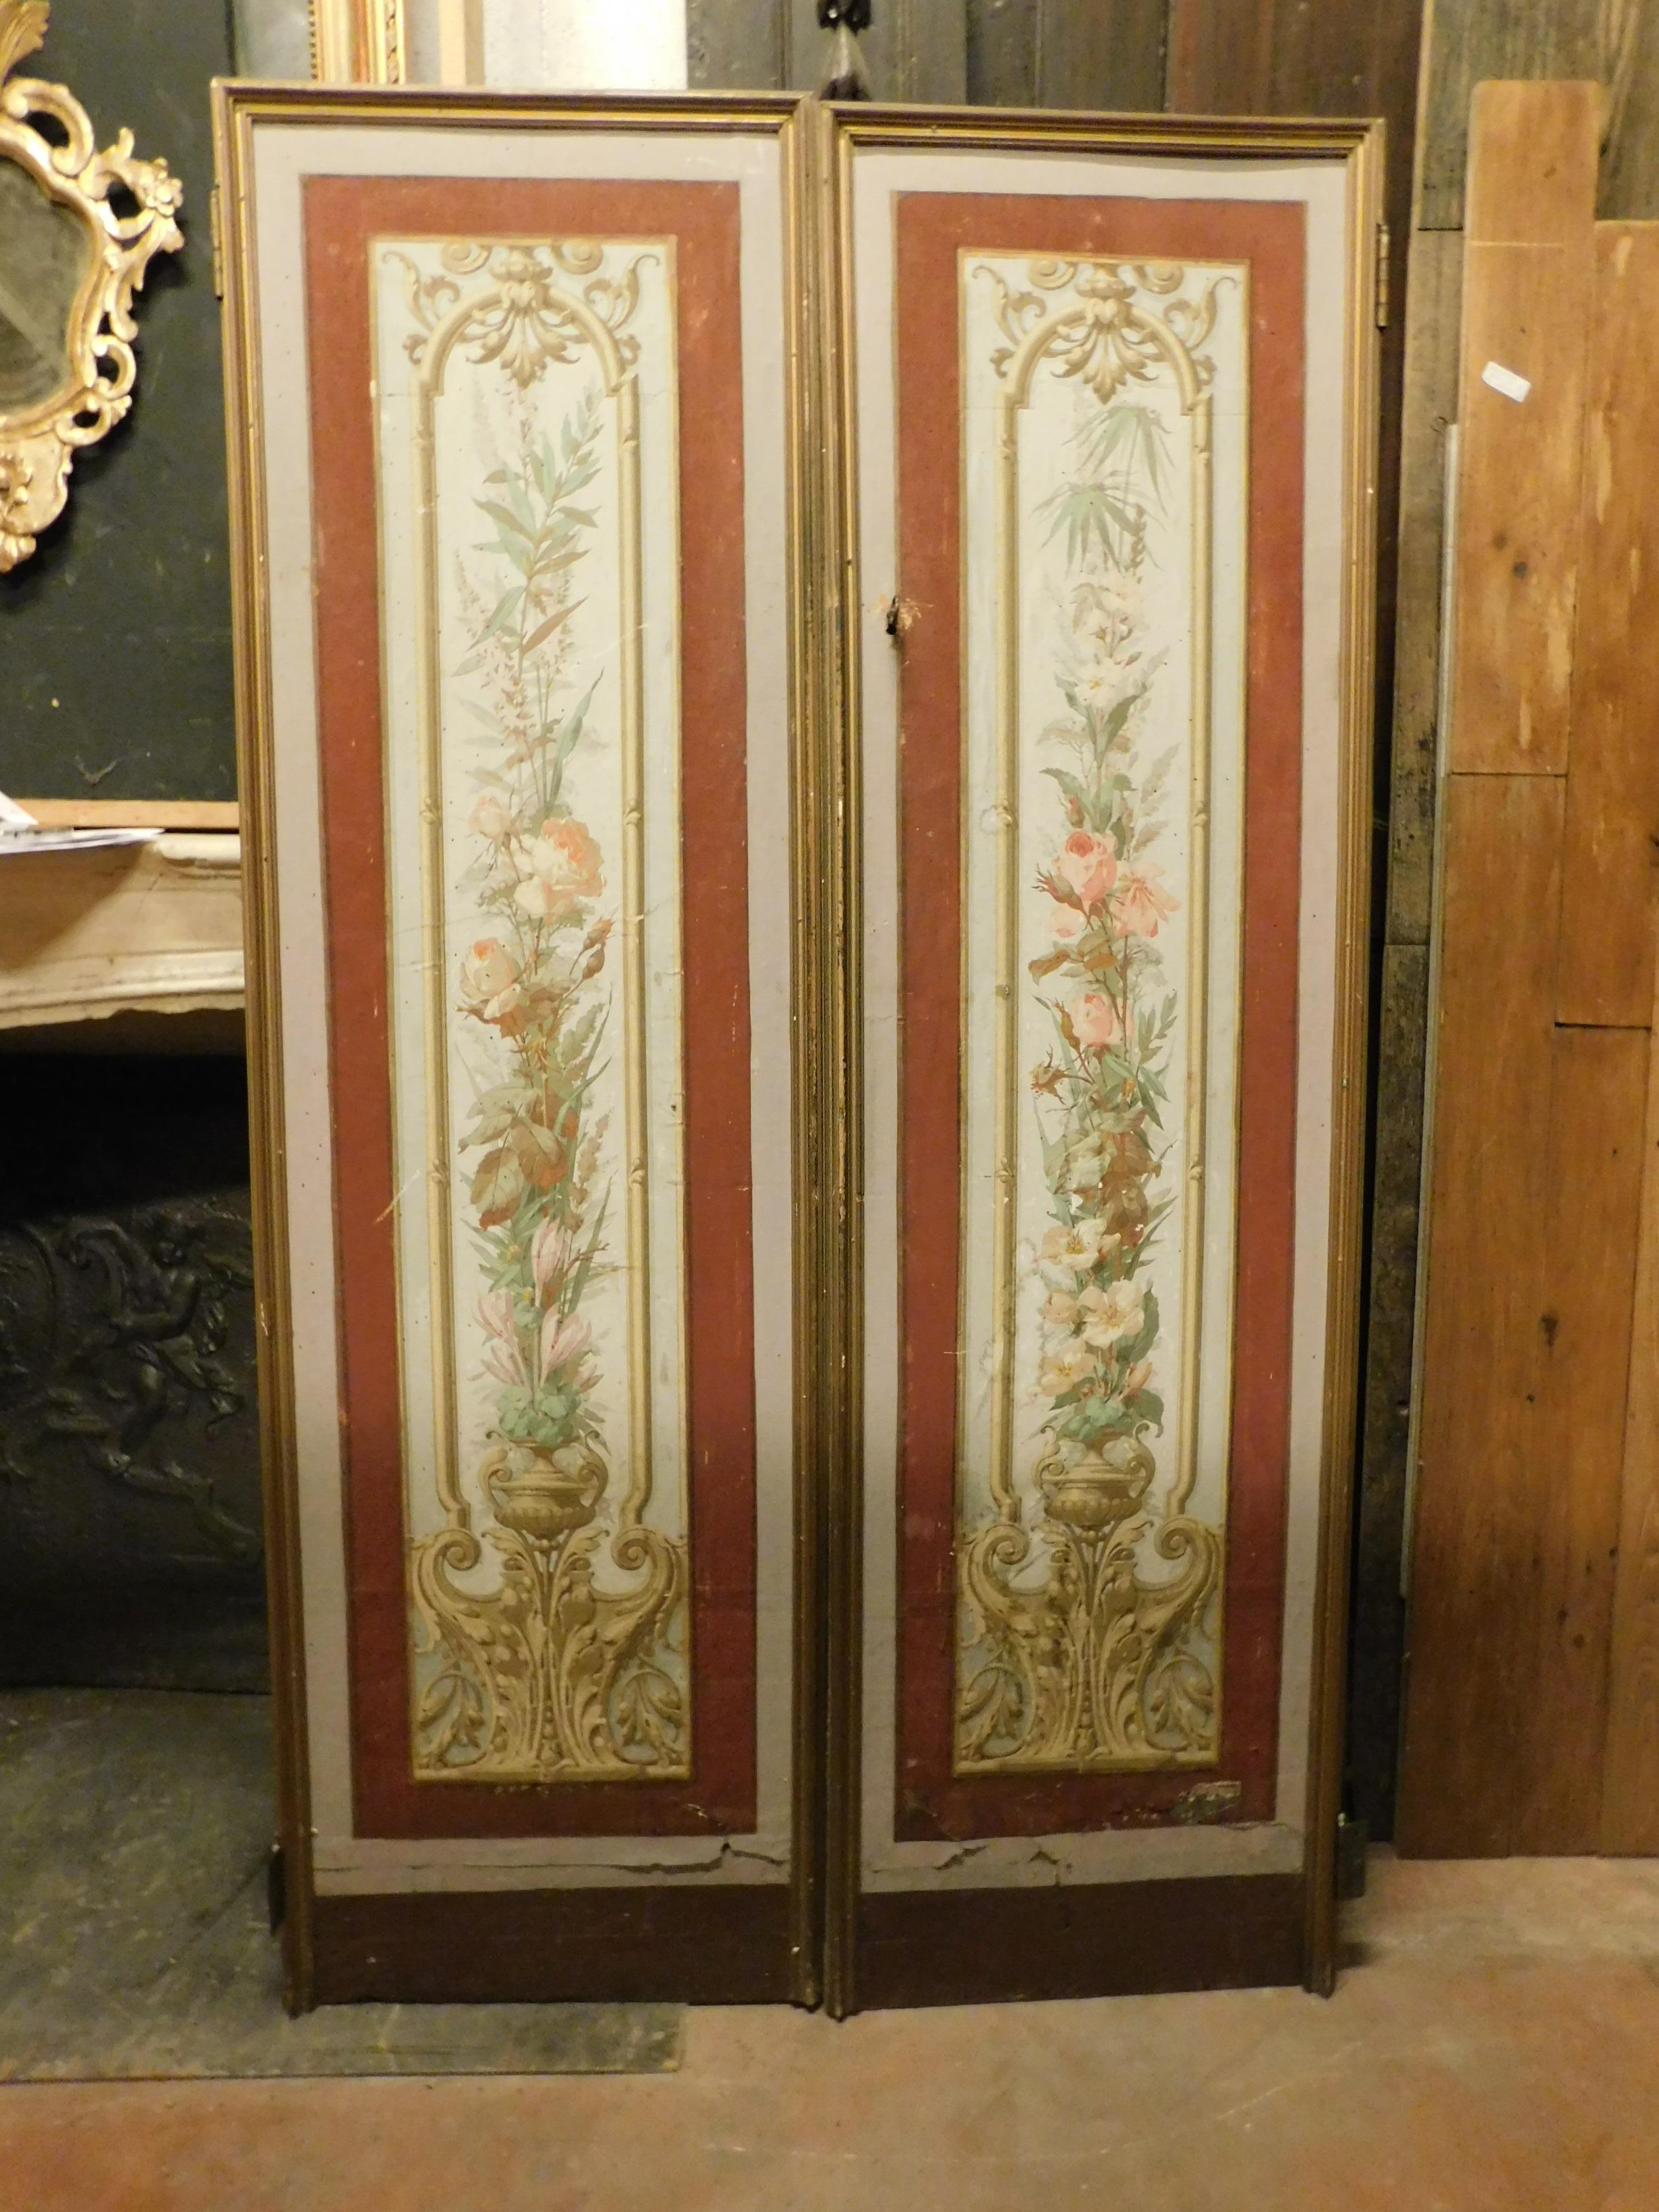 Vintage pair of lacquered and painted doors, painted with floral motifs typical of the art noveau - liberty style, from the early 1900s, handmade in Italy.
They have pull hinges, so they were probably from a built-in wardrobe, in good condition